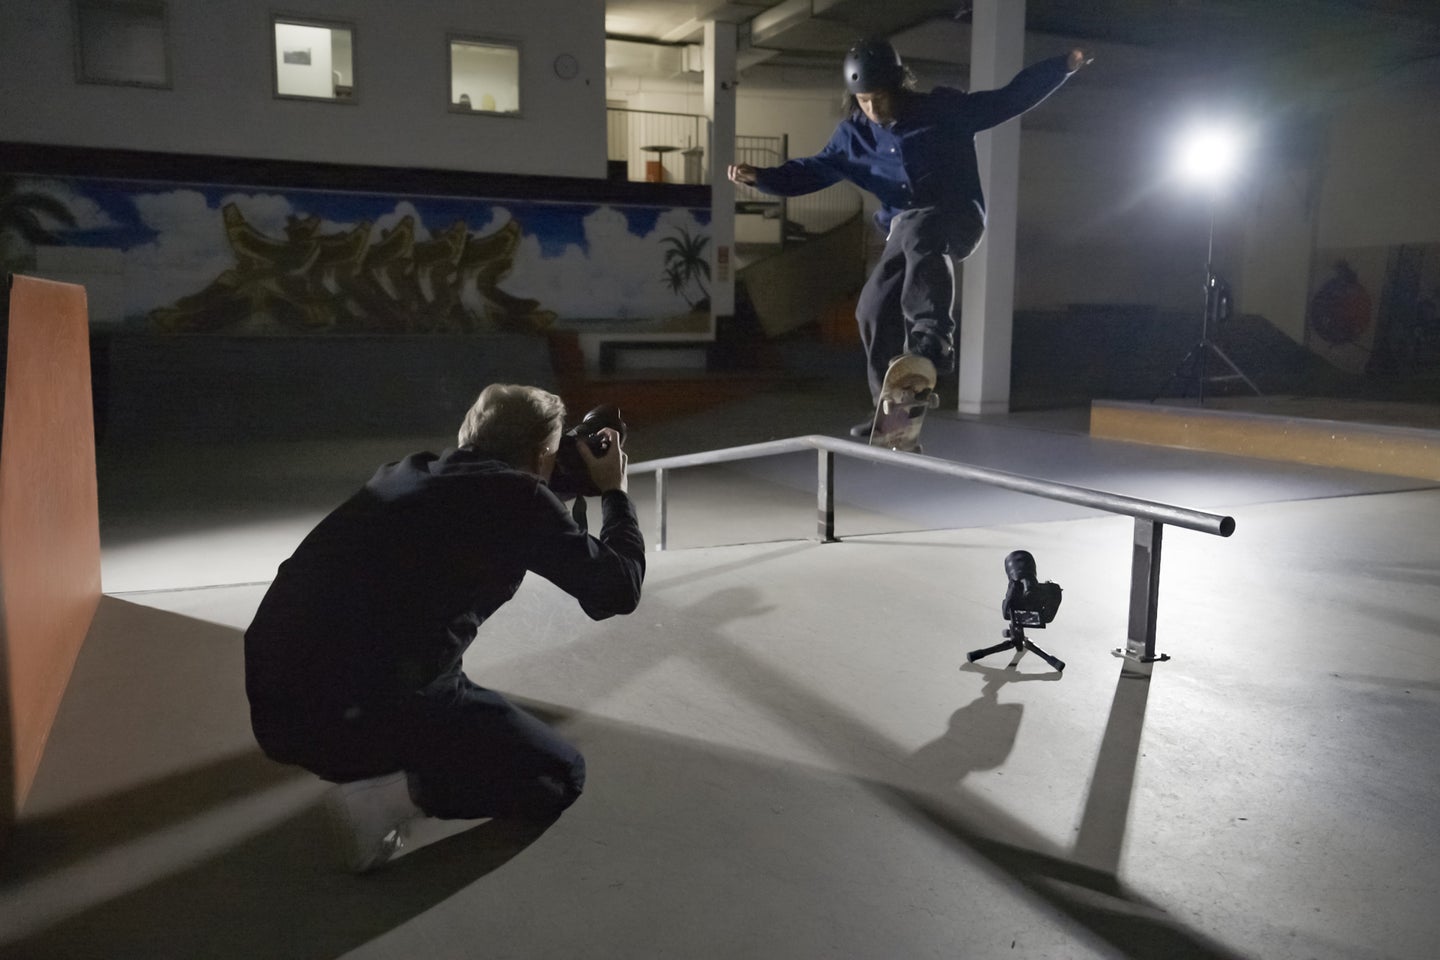 A photographer takes a photo of a skateboarder using a remote camera with the Z9 firmware update